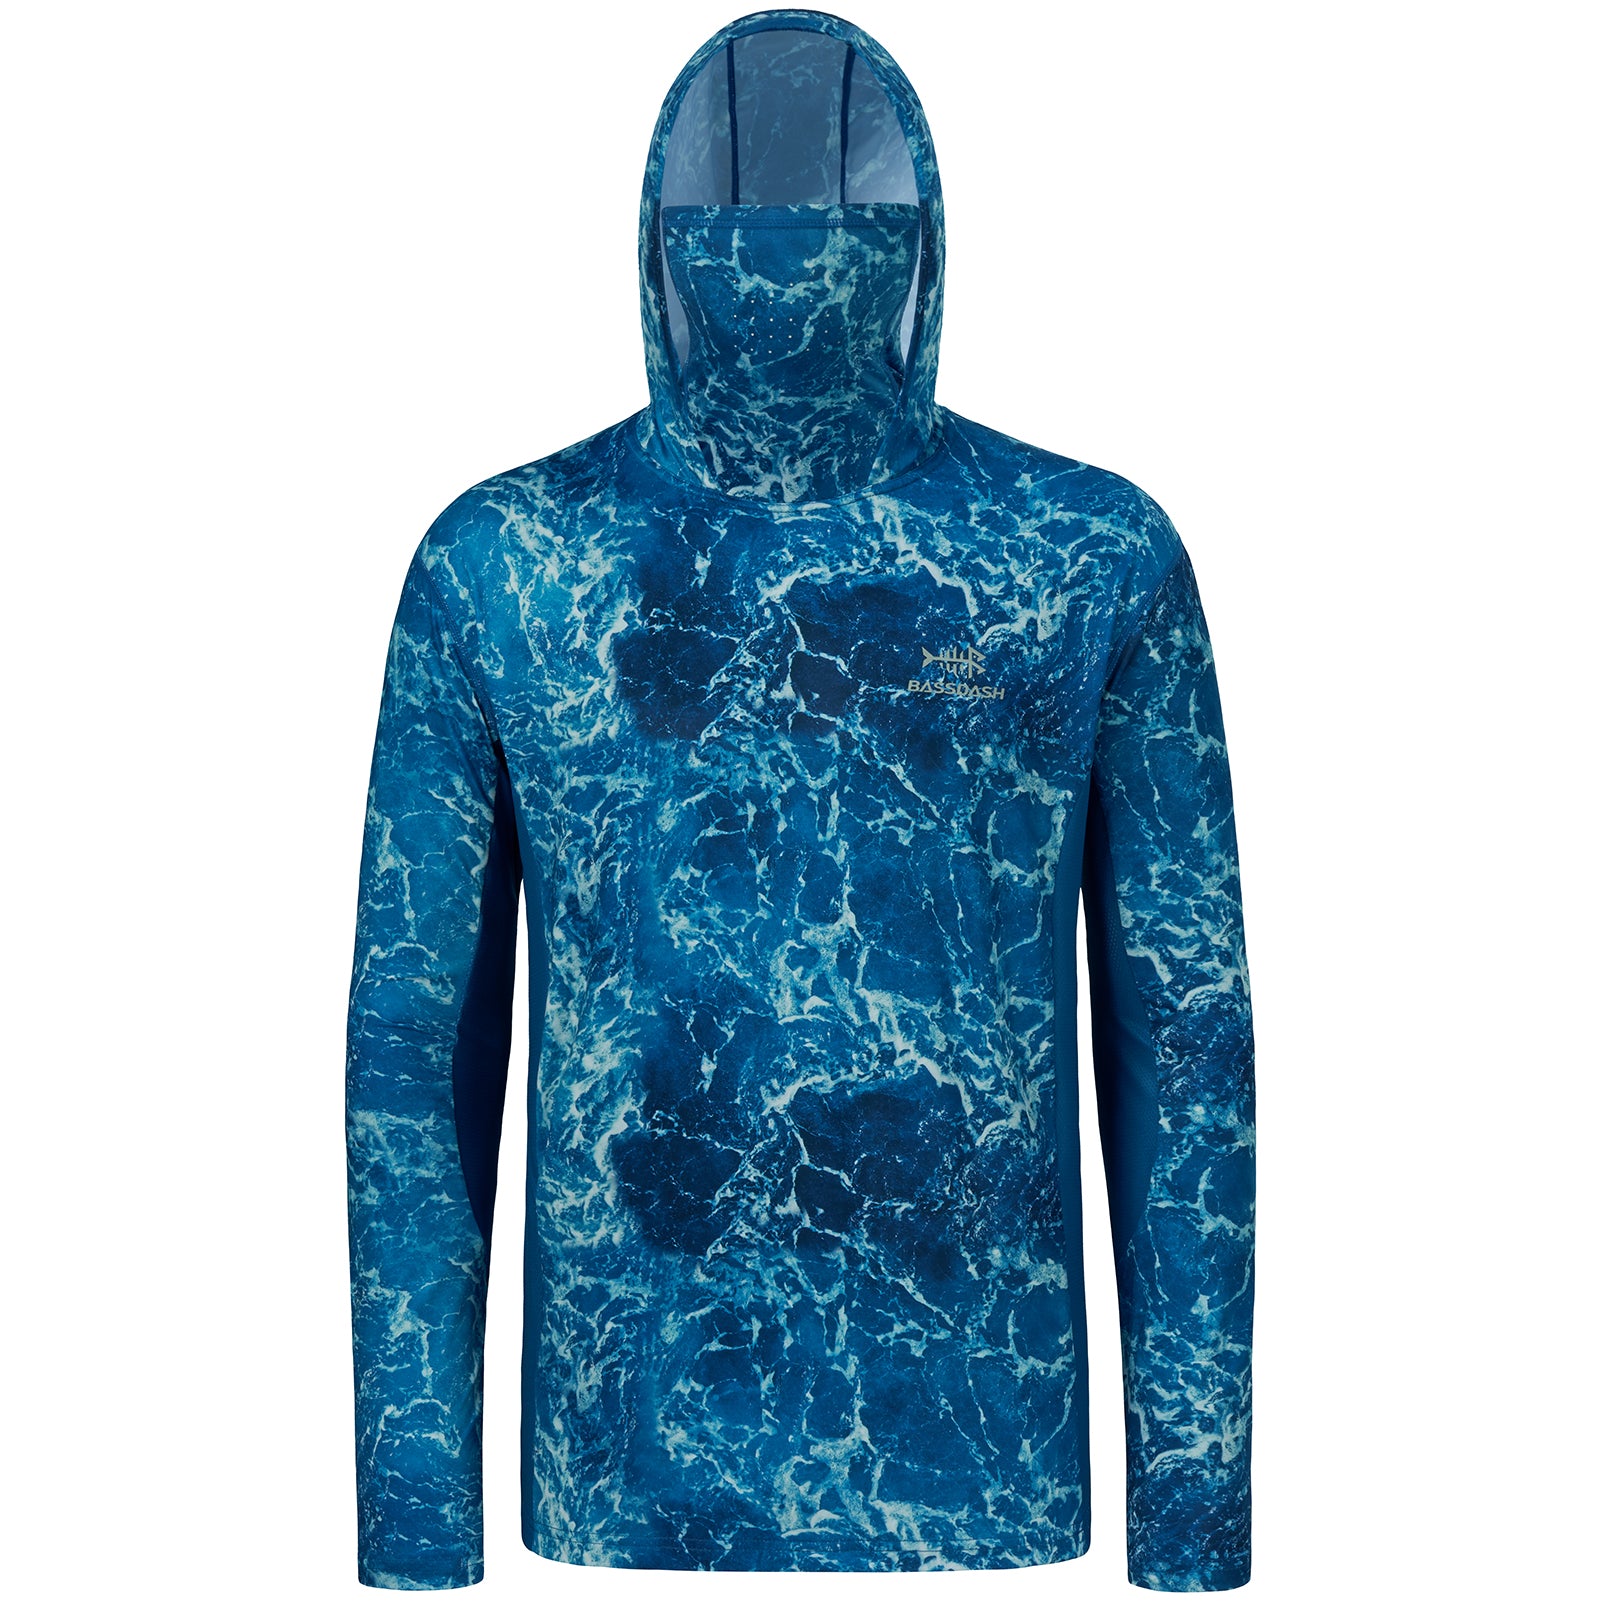 Men's UPF 50+ Camo Fishing Hoodie Shirts with Face Cover FS25M Blue Camo with Neck Gaiter / 3X-Large